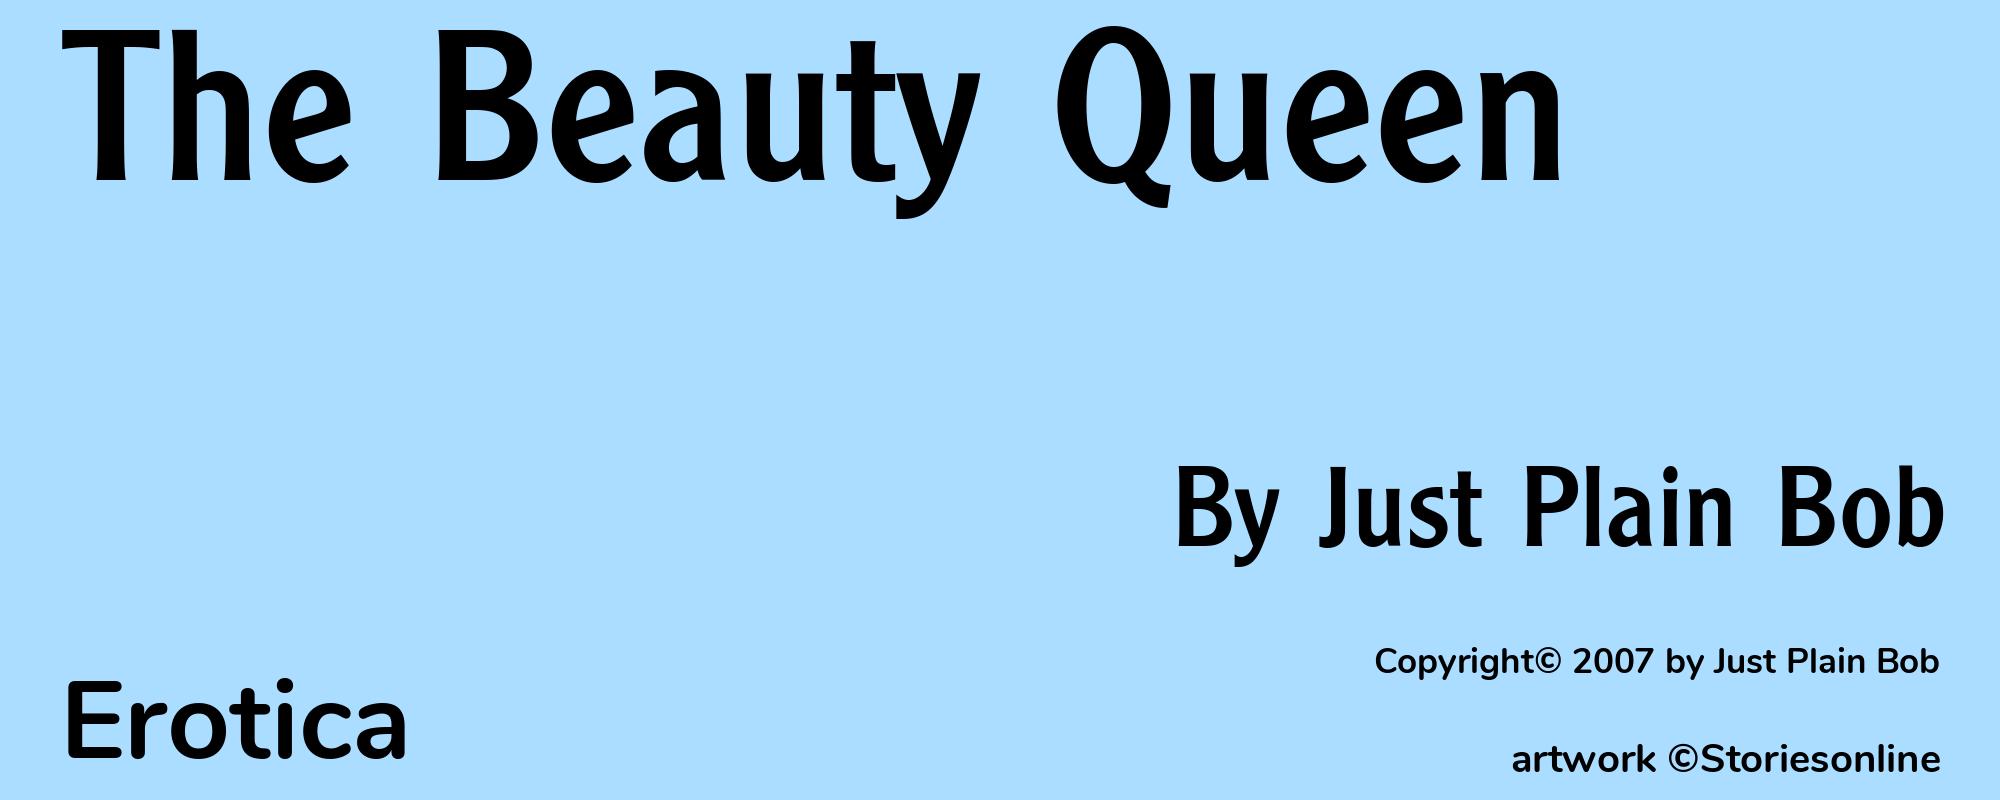 The Beauty Queen - Cover